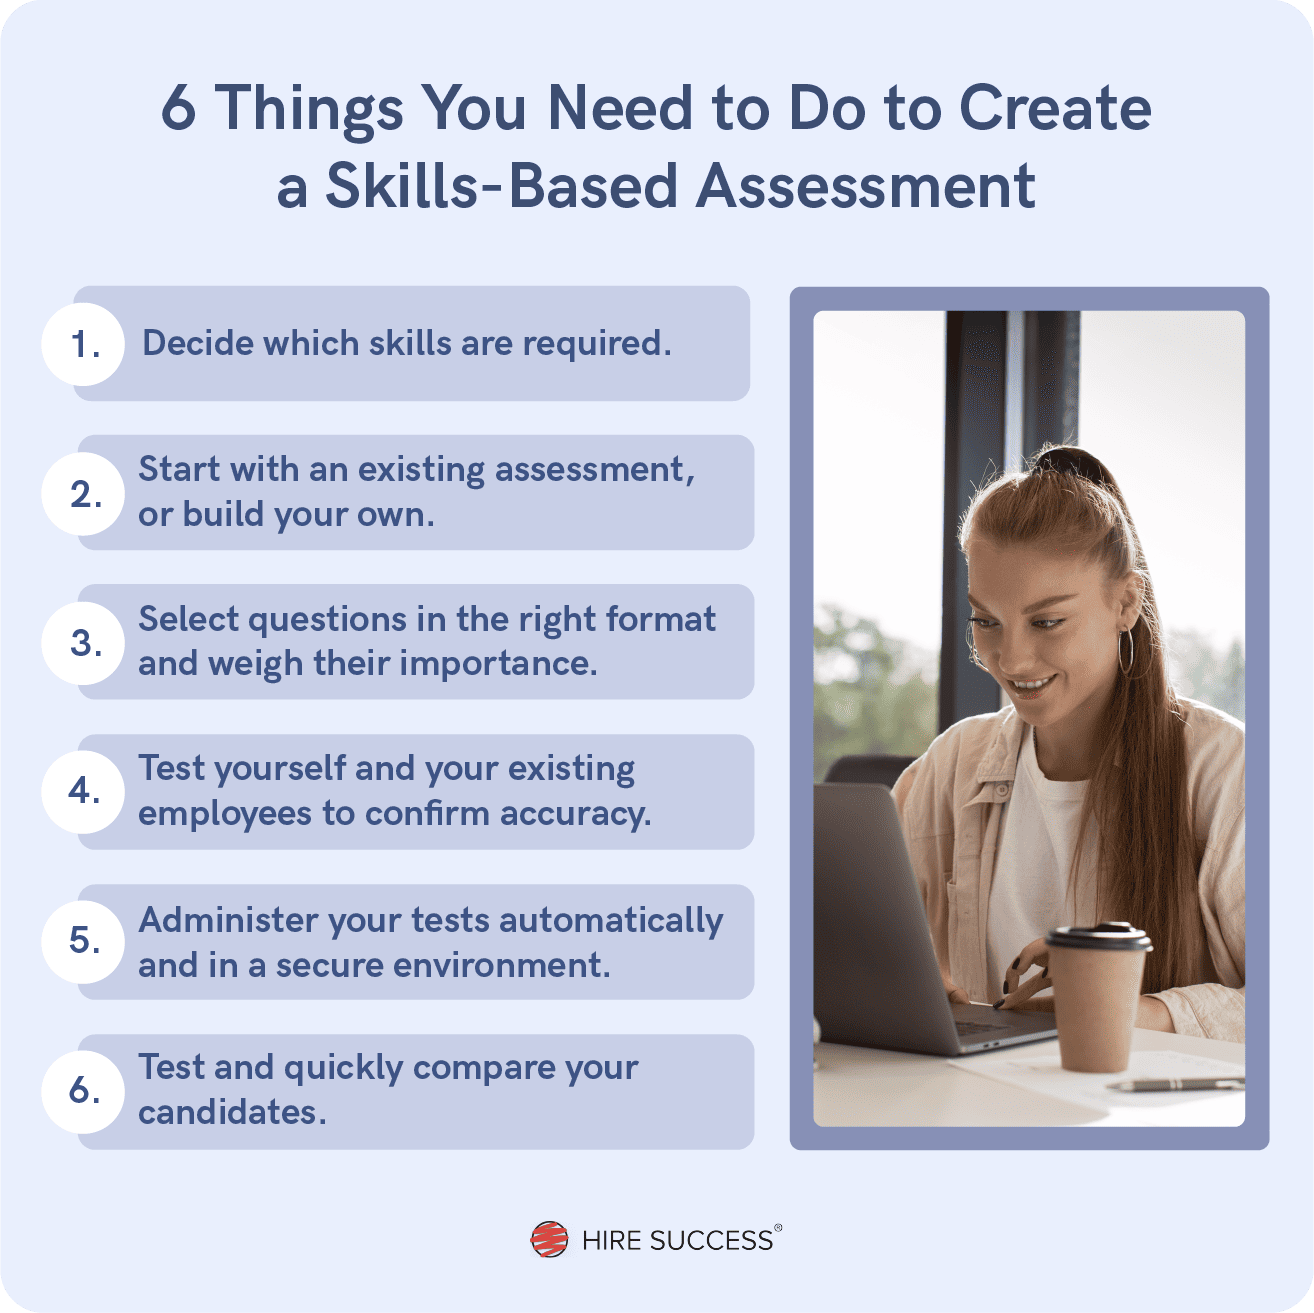 How to create an effective skills assessment.